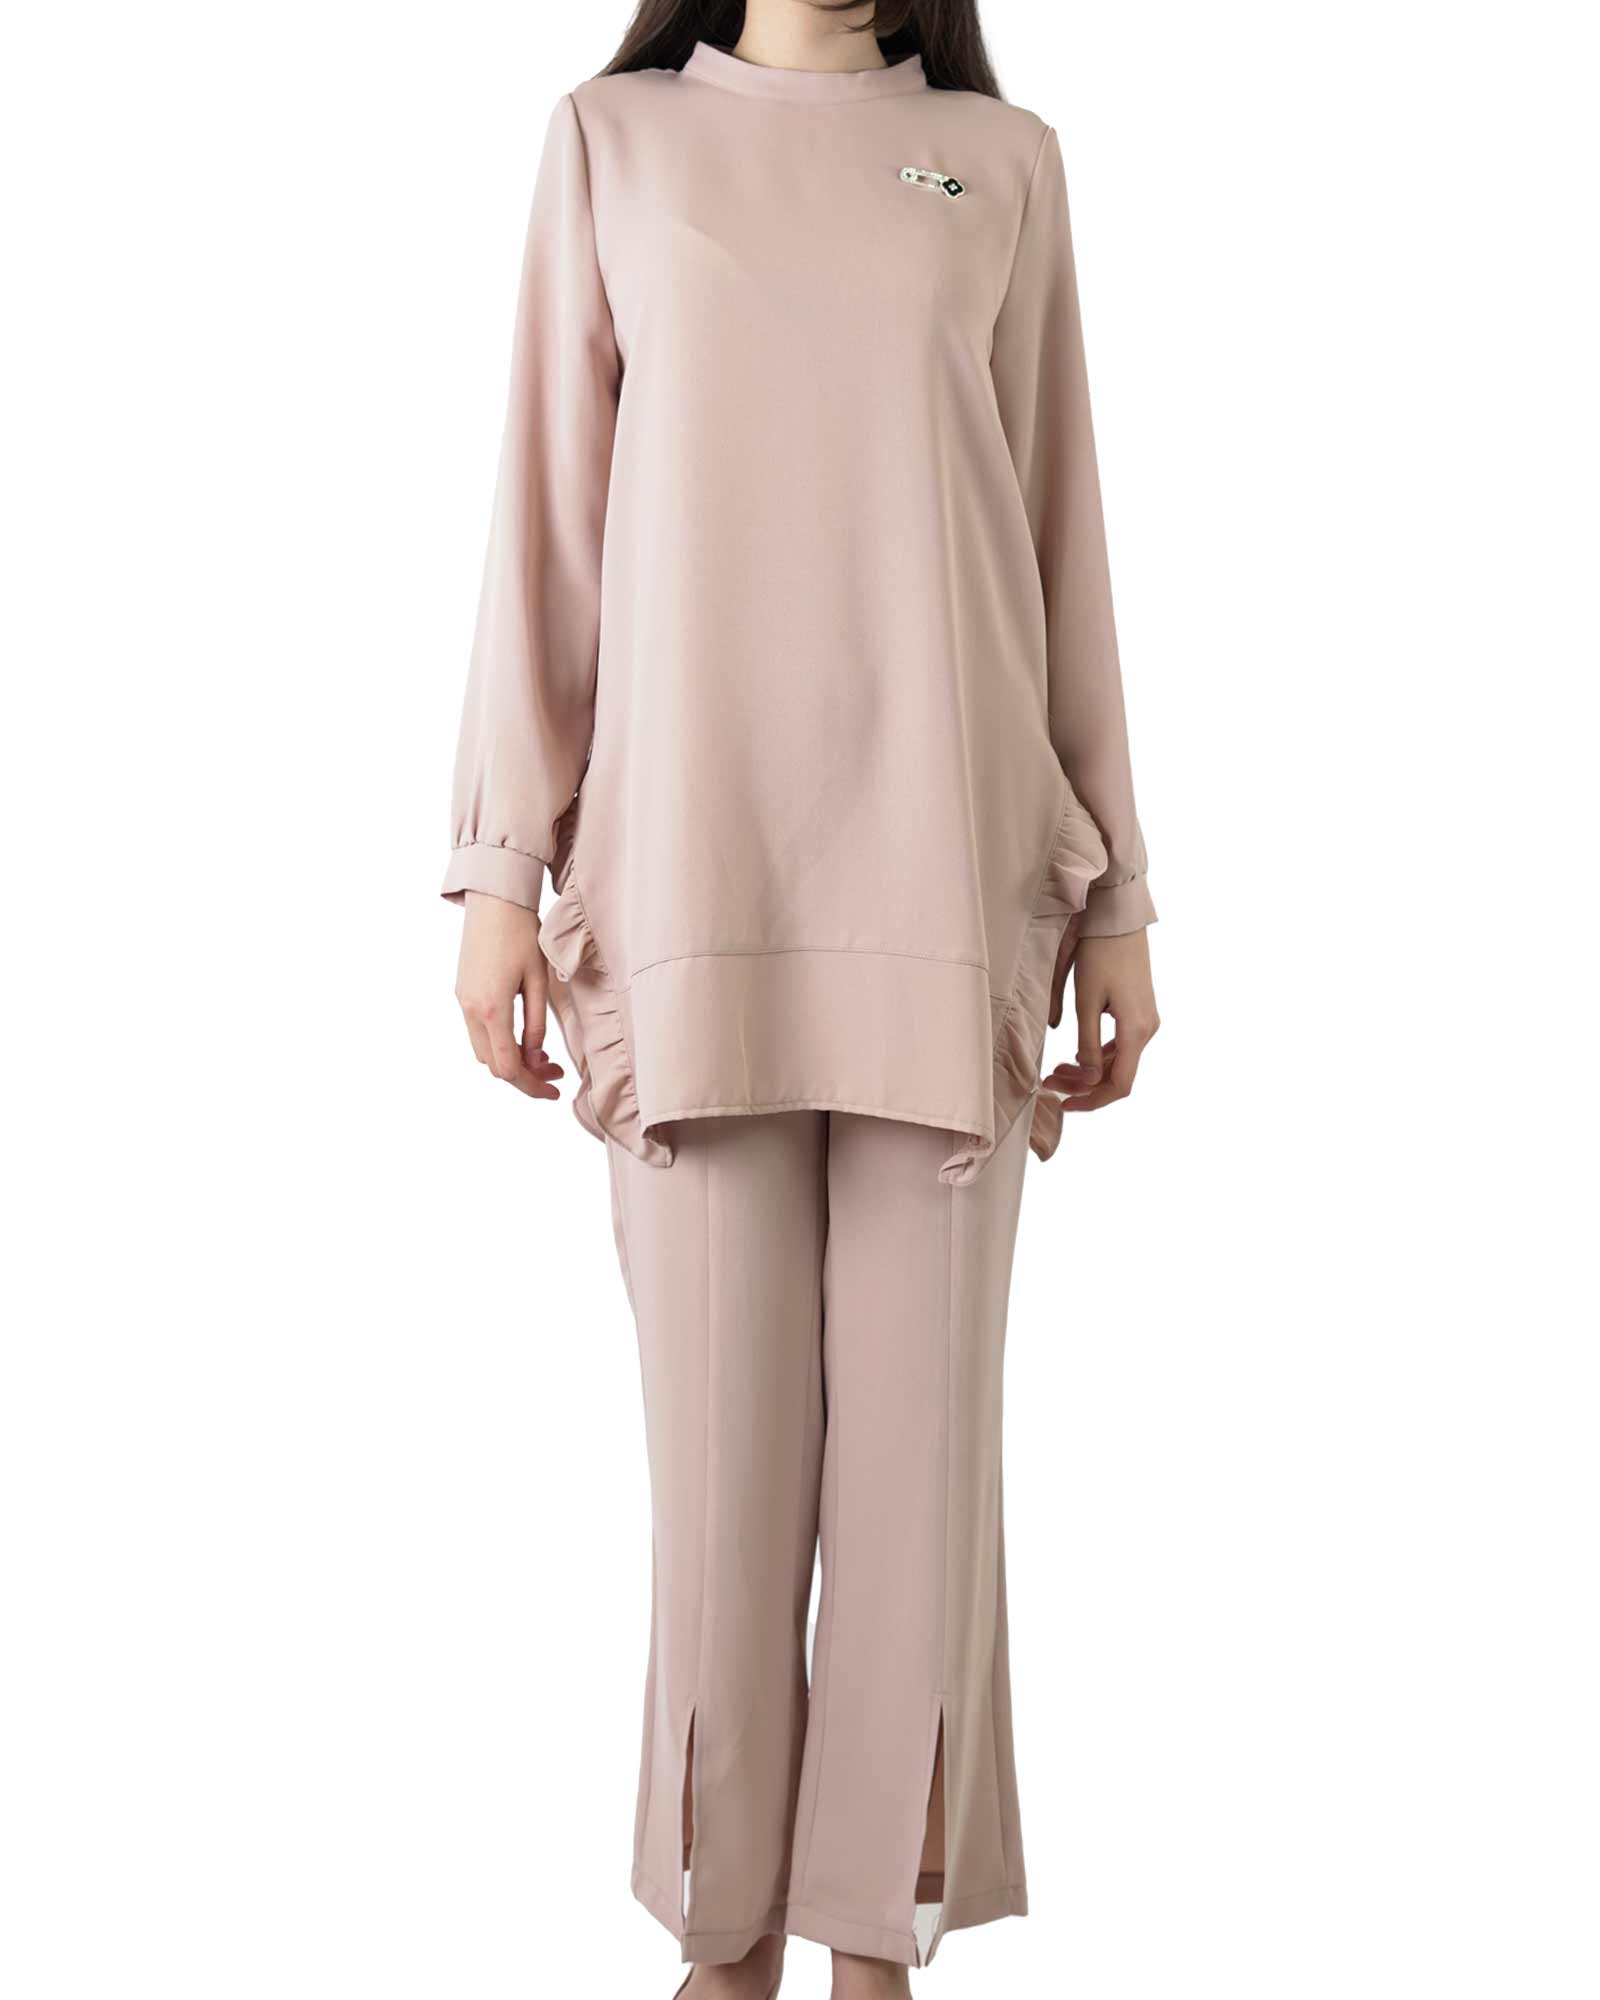 Two-piece set with blouse with ruffle details and pants with slits